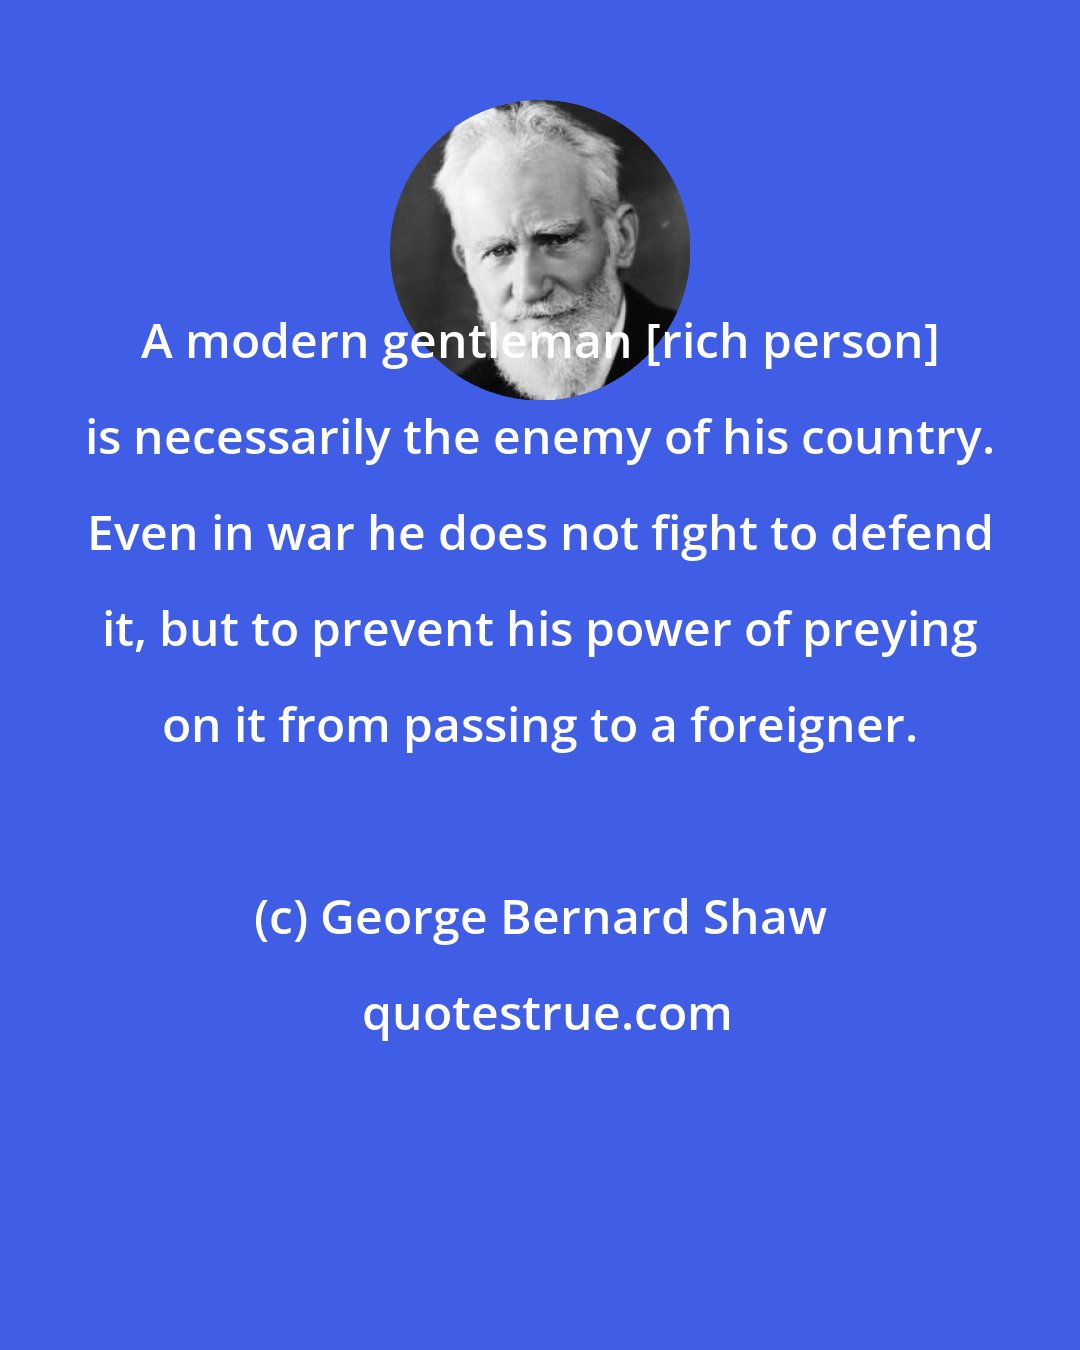 George Bernard Shaw: A modern gentleman [rich person] is necessarily the enemy of his country. Even in war he does not fight to defend it, but to prevent his power of preying on it from passing to a foreigner.